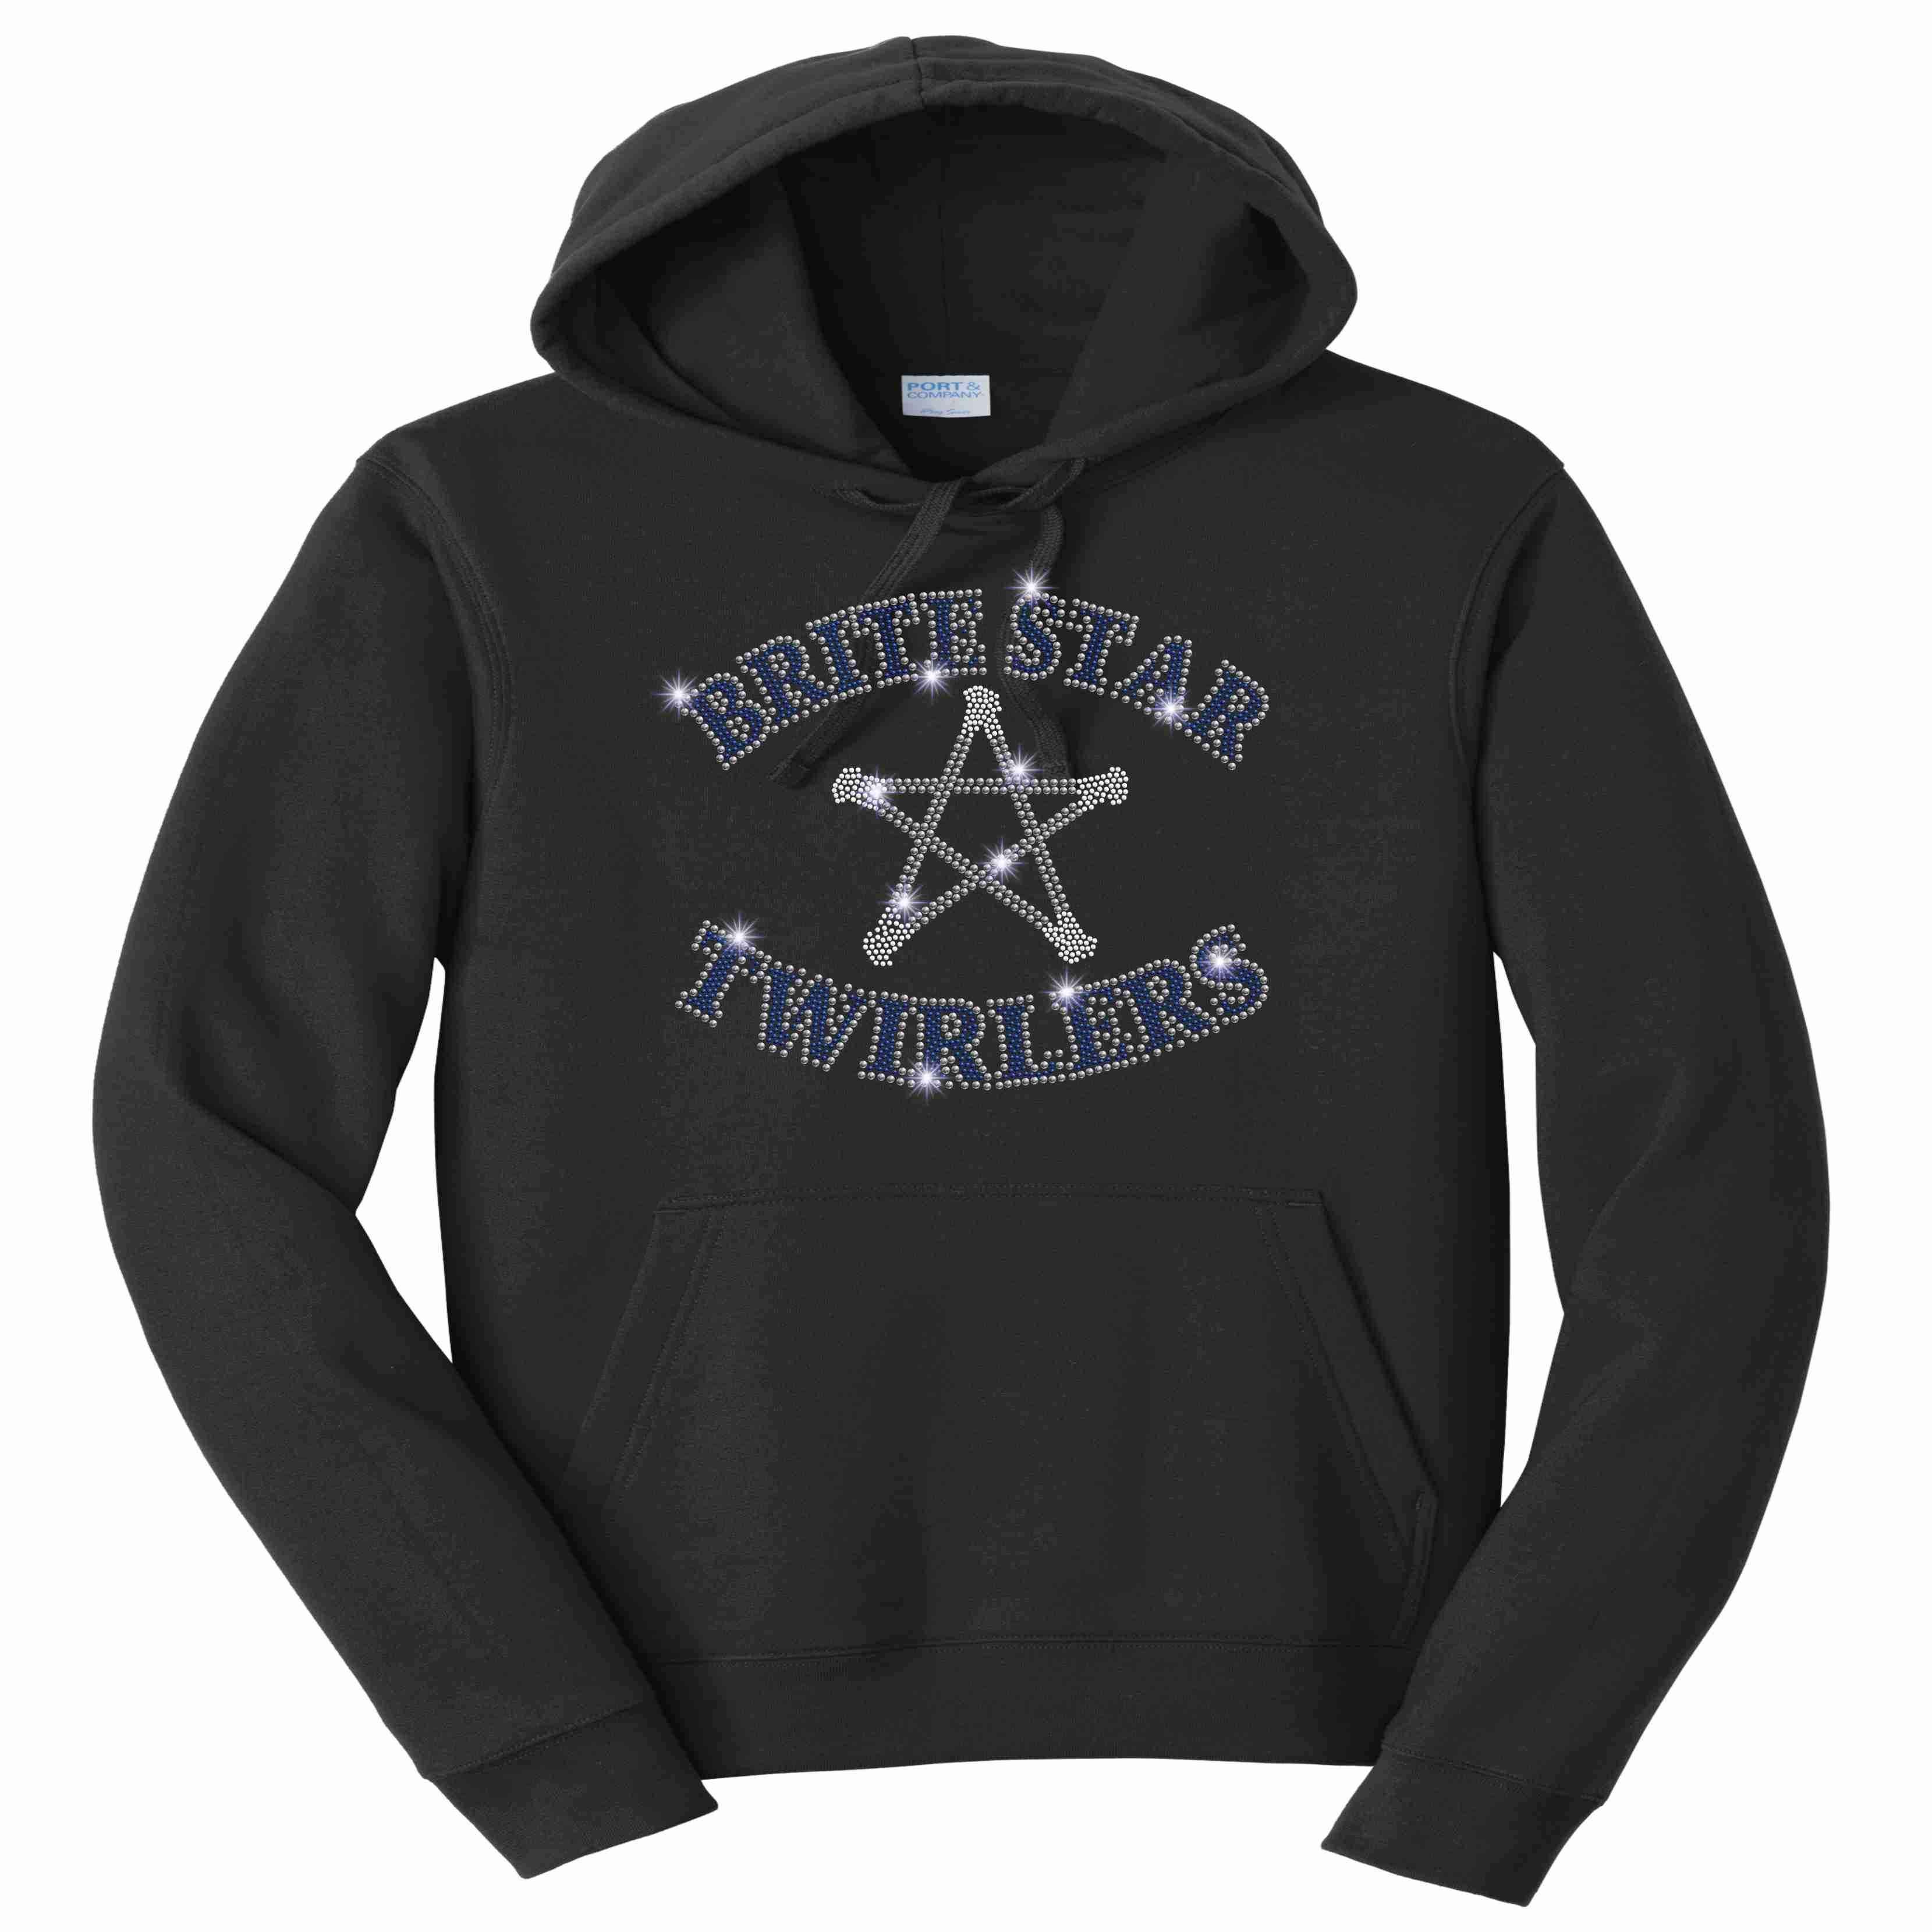 Brite Star Twirlers- Adult Bling Hoodie Hoodie Beckys-Boutique.com Small Black 